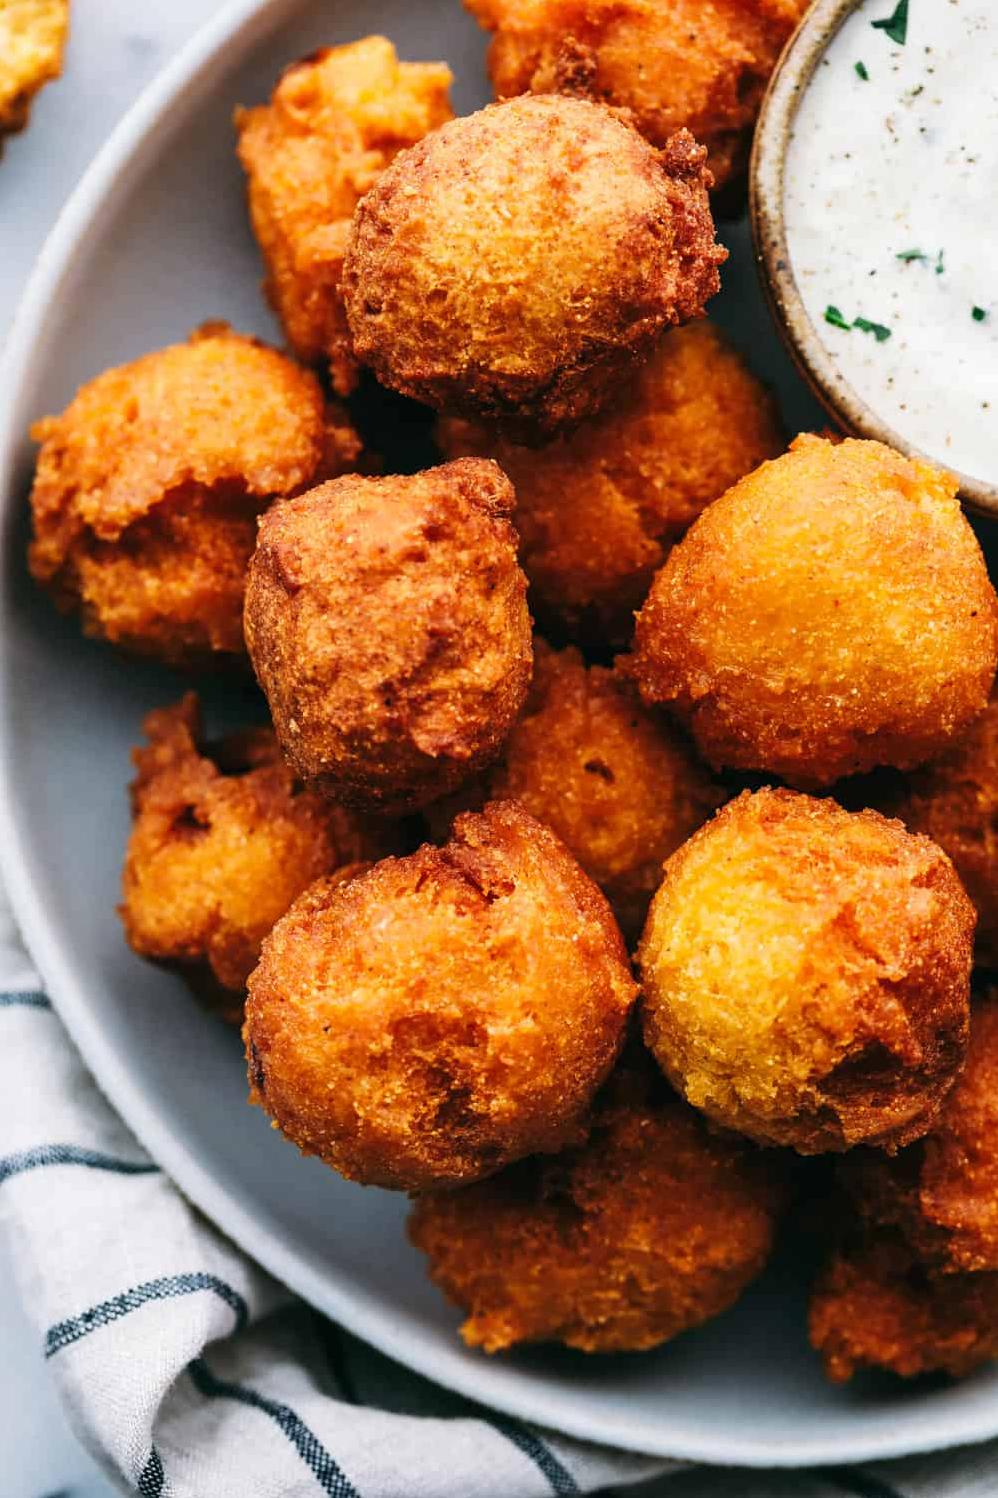  Fried to perfection, these hush puppies are a must-have at any southern meal.